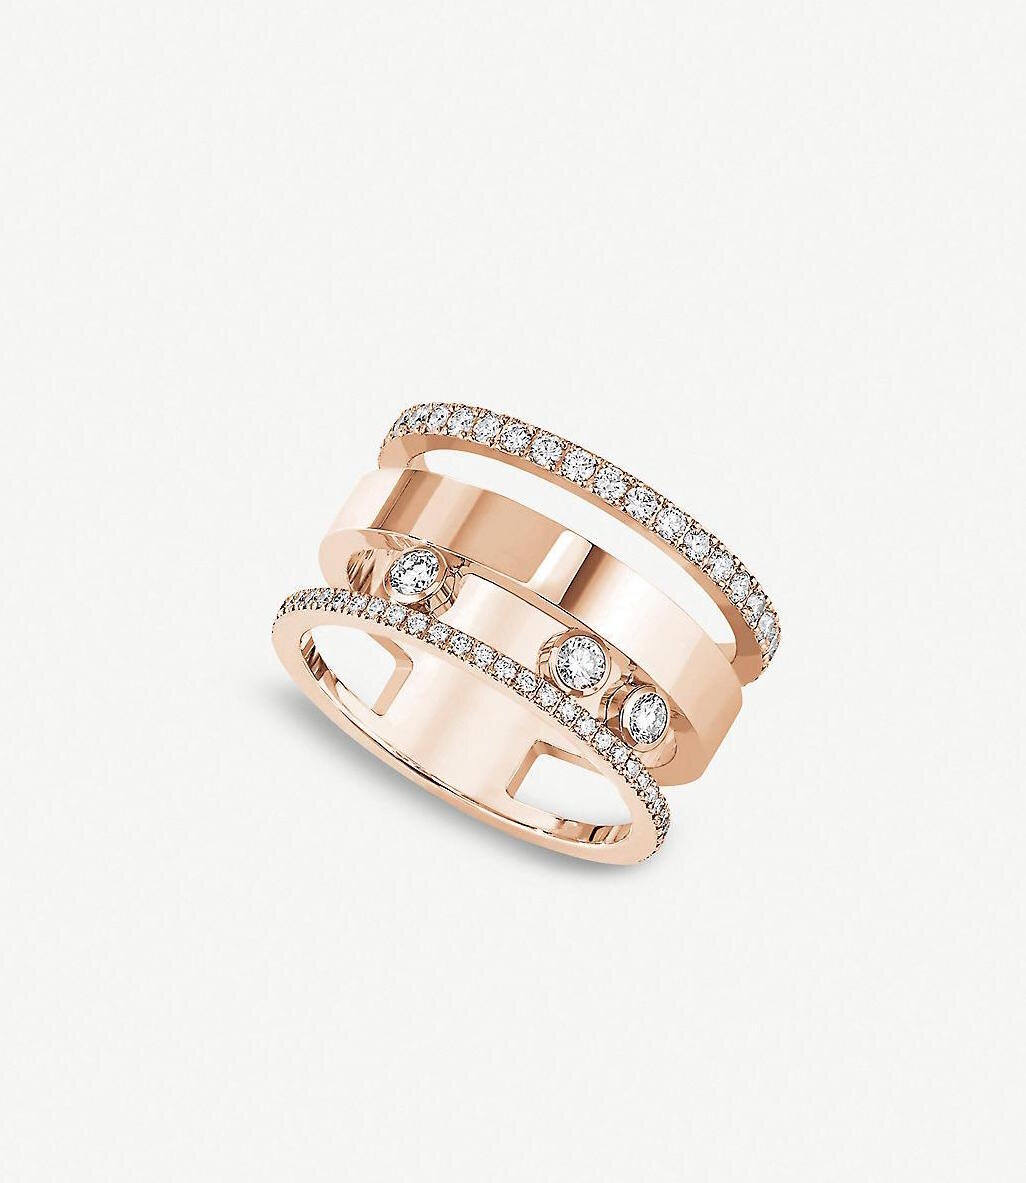 Messika Move Romane Large Ring in Rose-Gold And Diamond.jpg